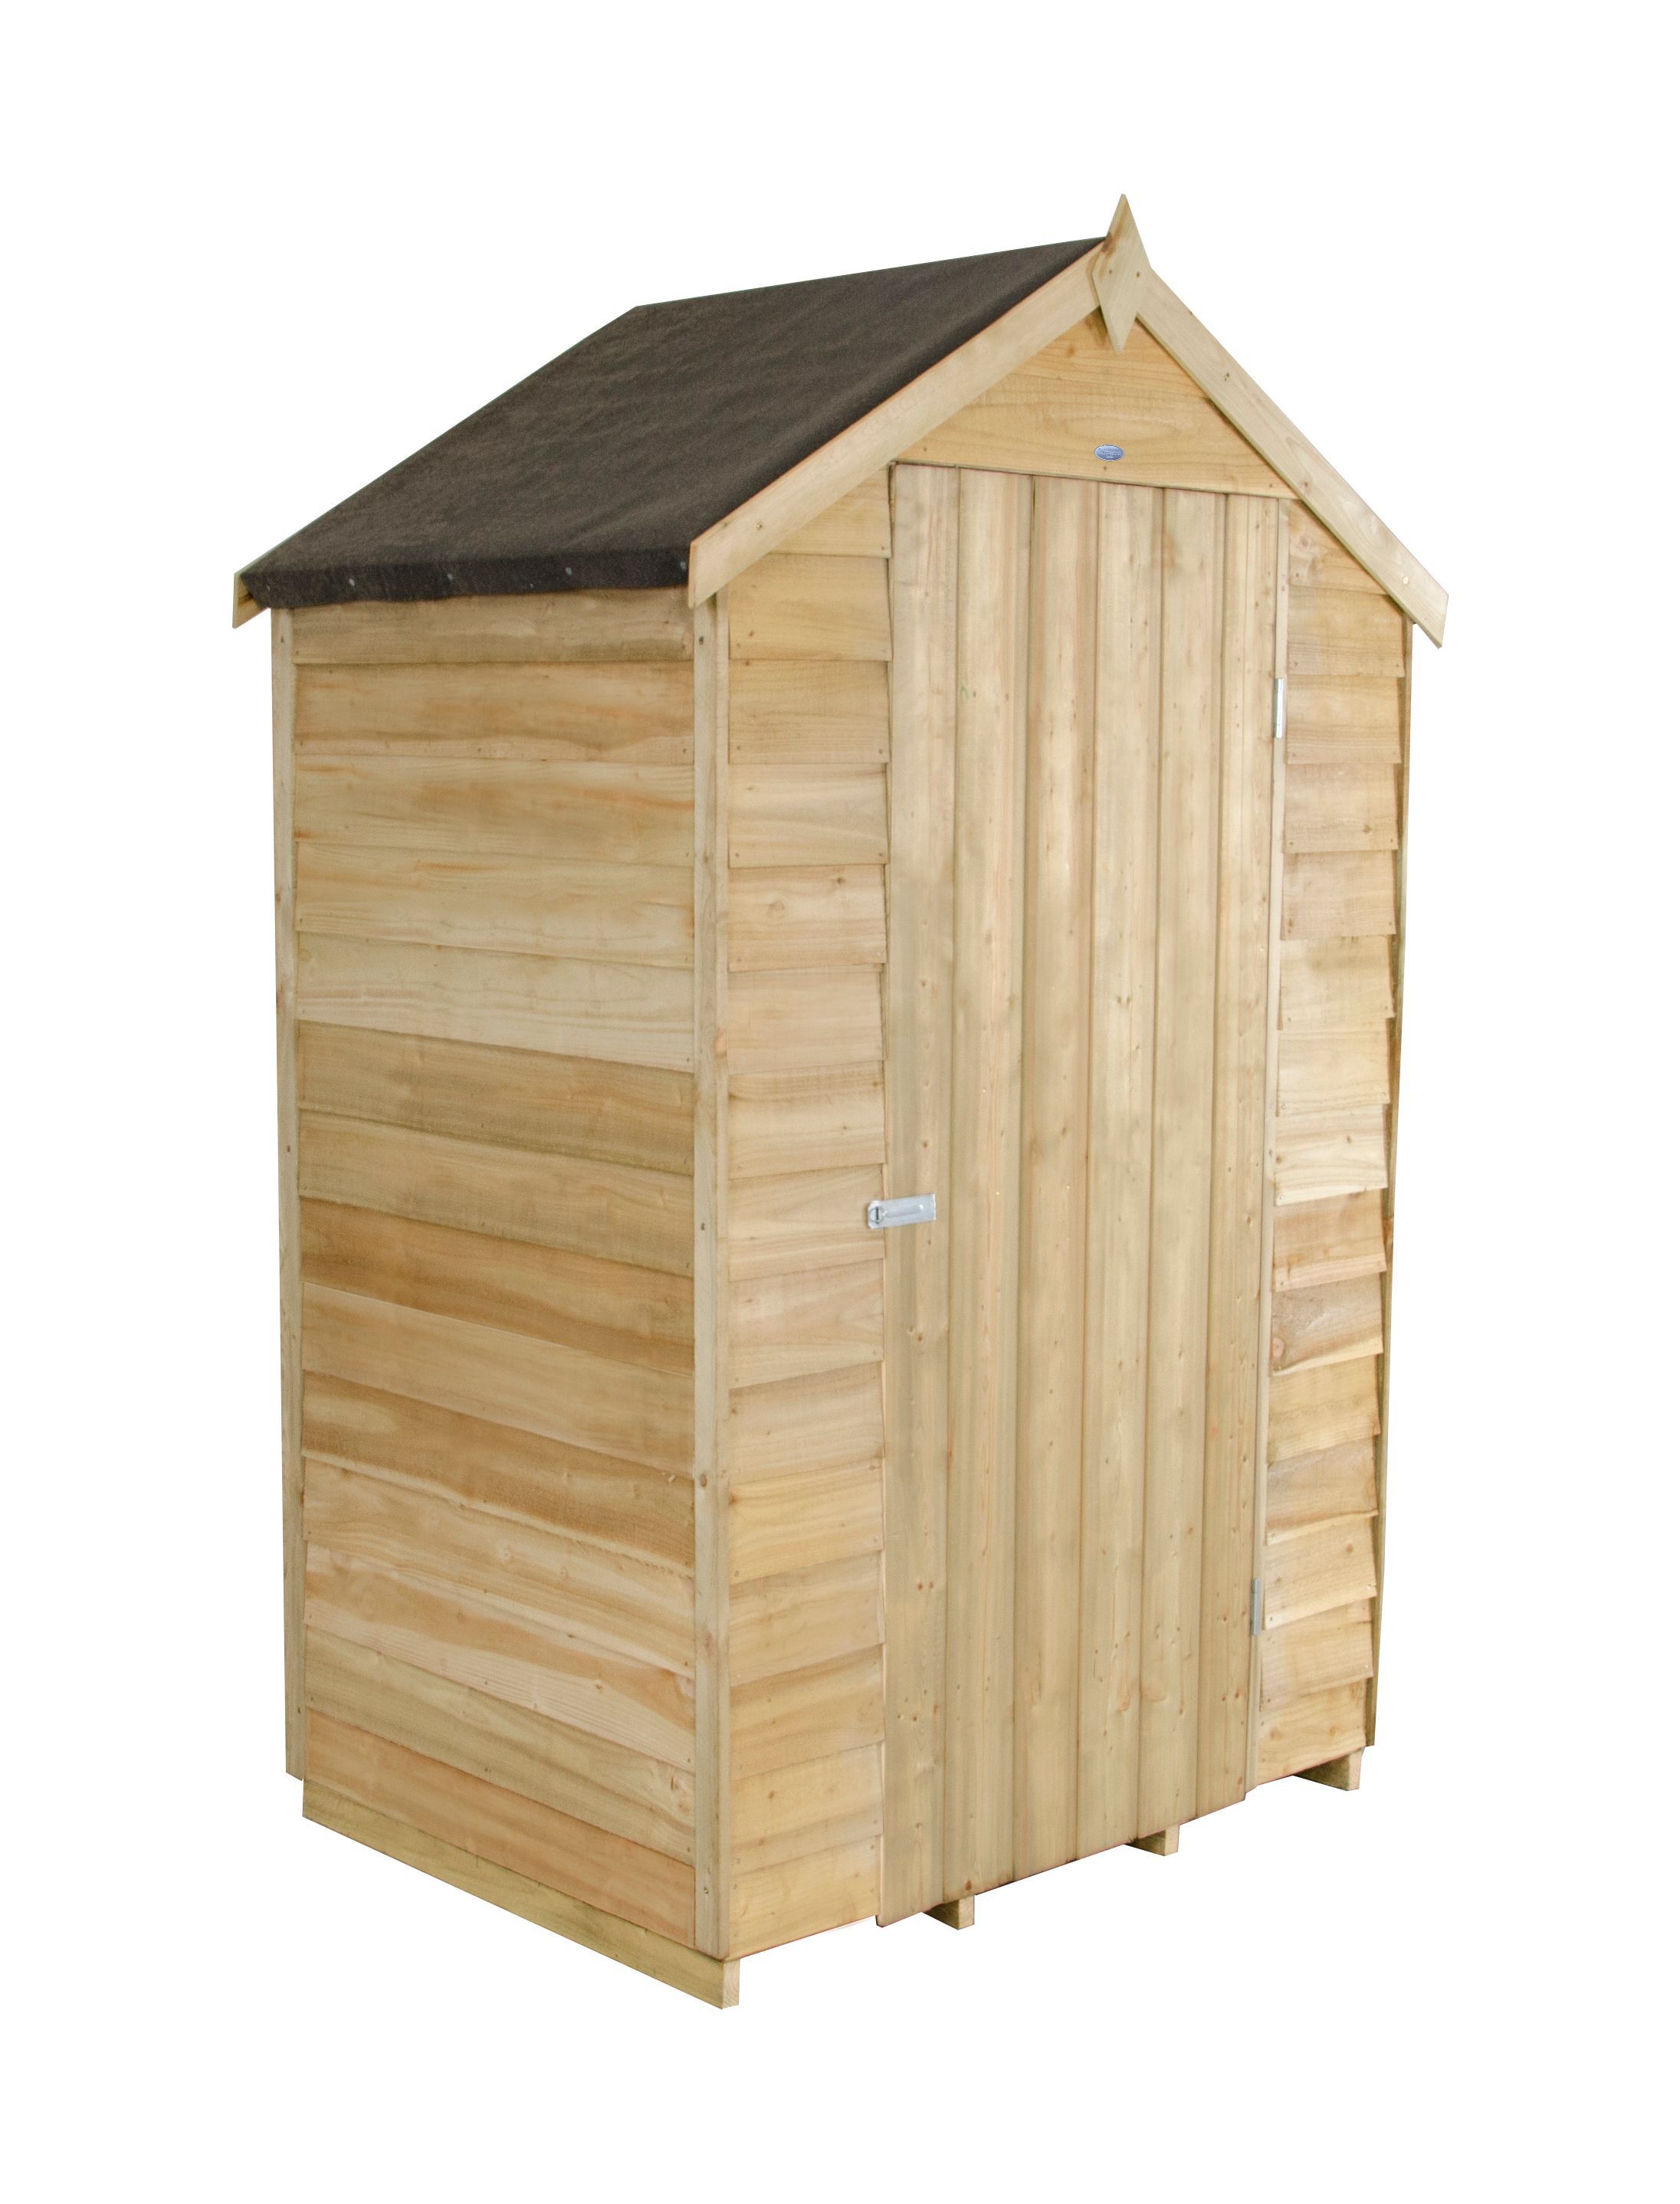 Forest Garden 4x3 Apex Overlap Wooden Shed